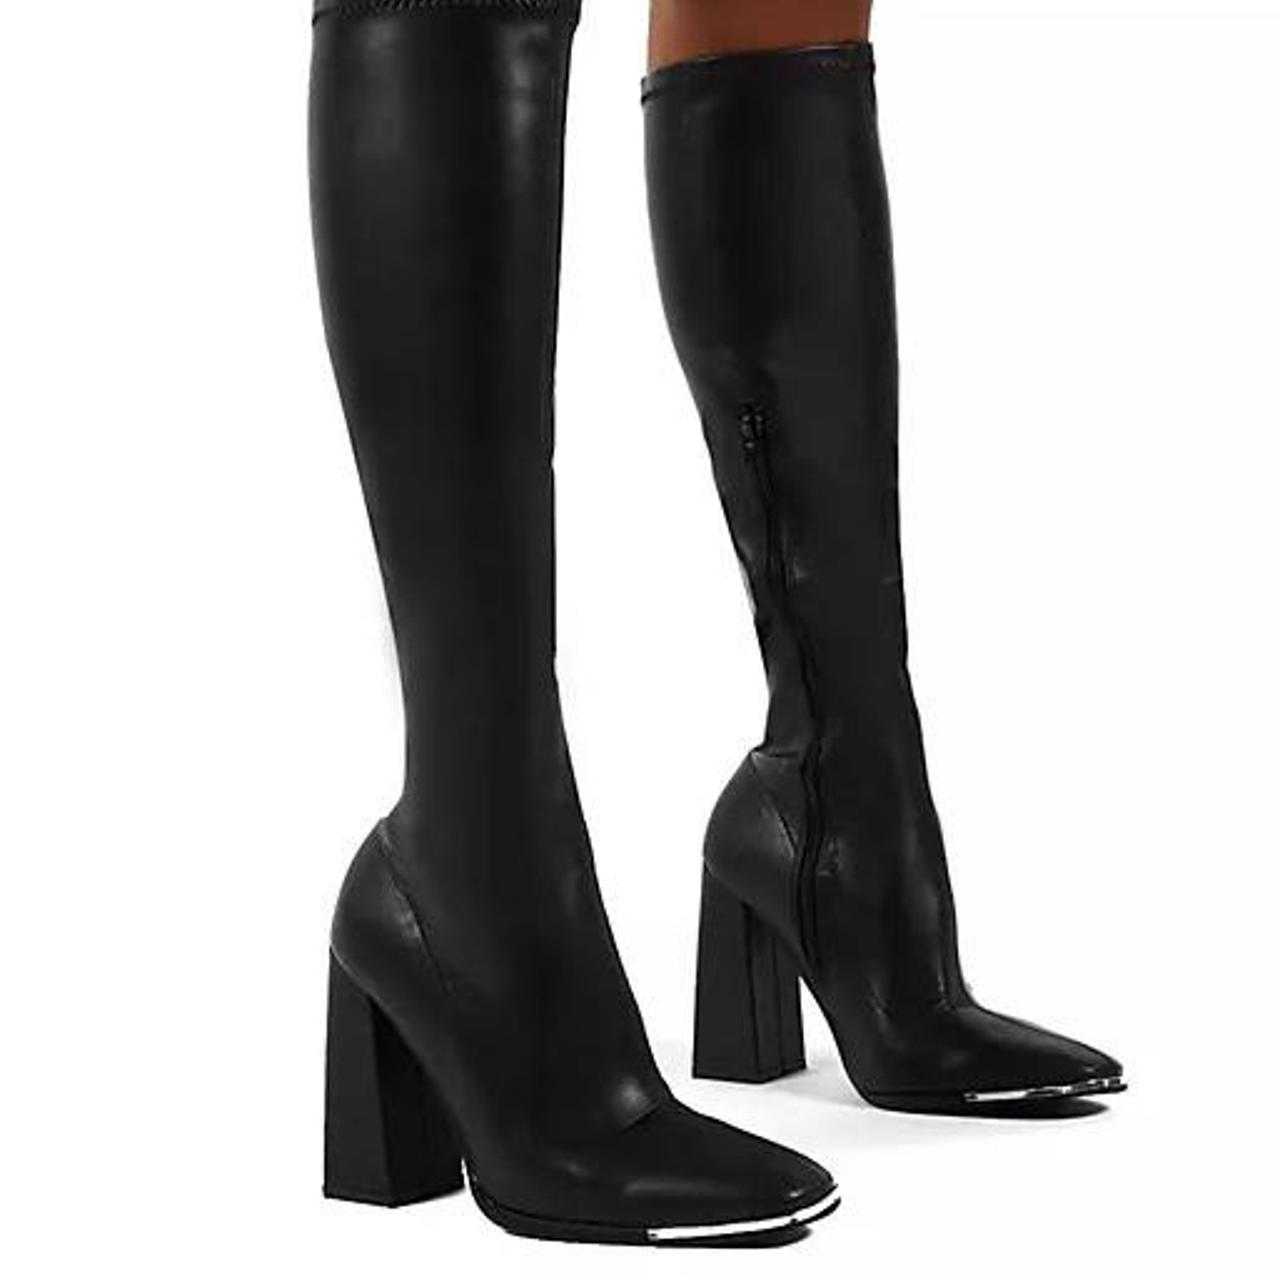 Product Image 1 - Public Desire Knee High Boots
Style